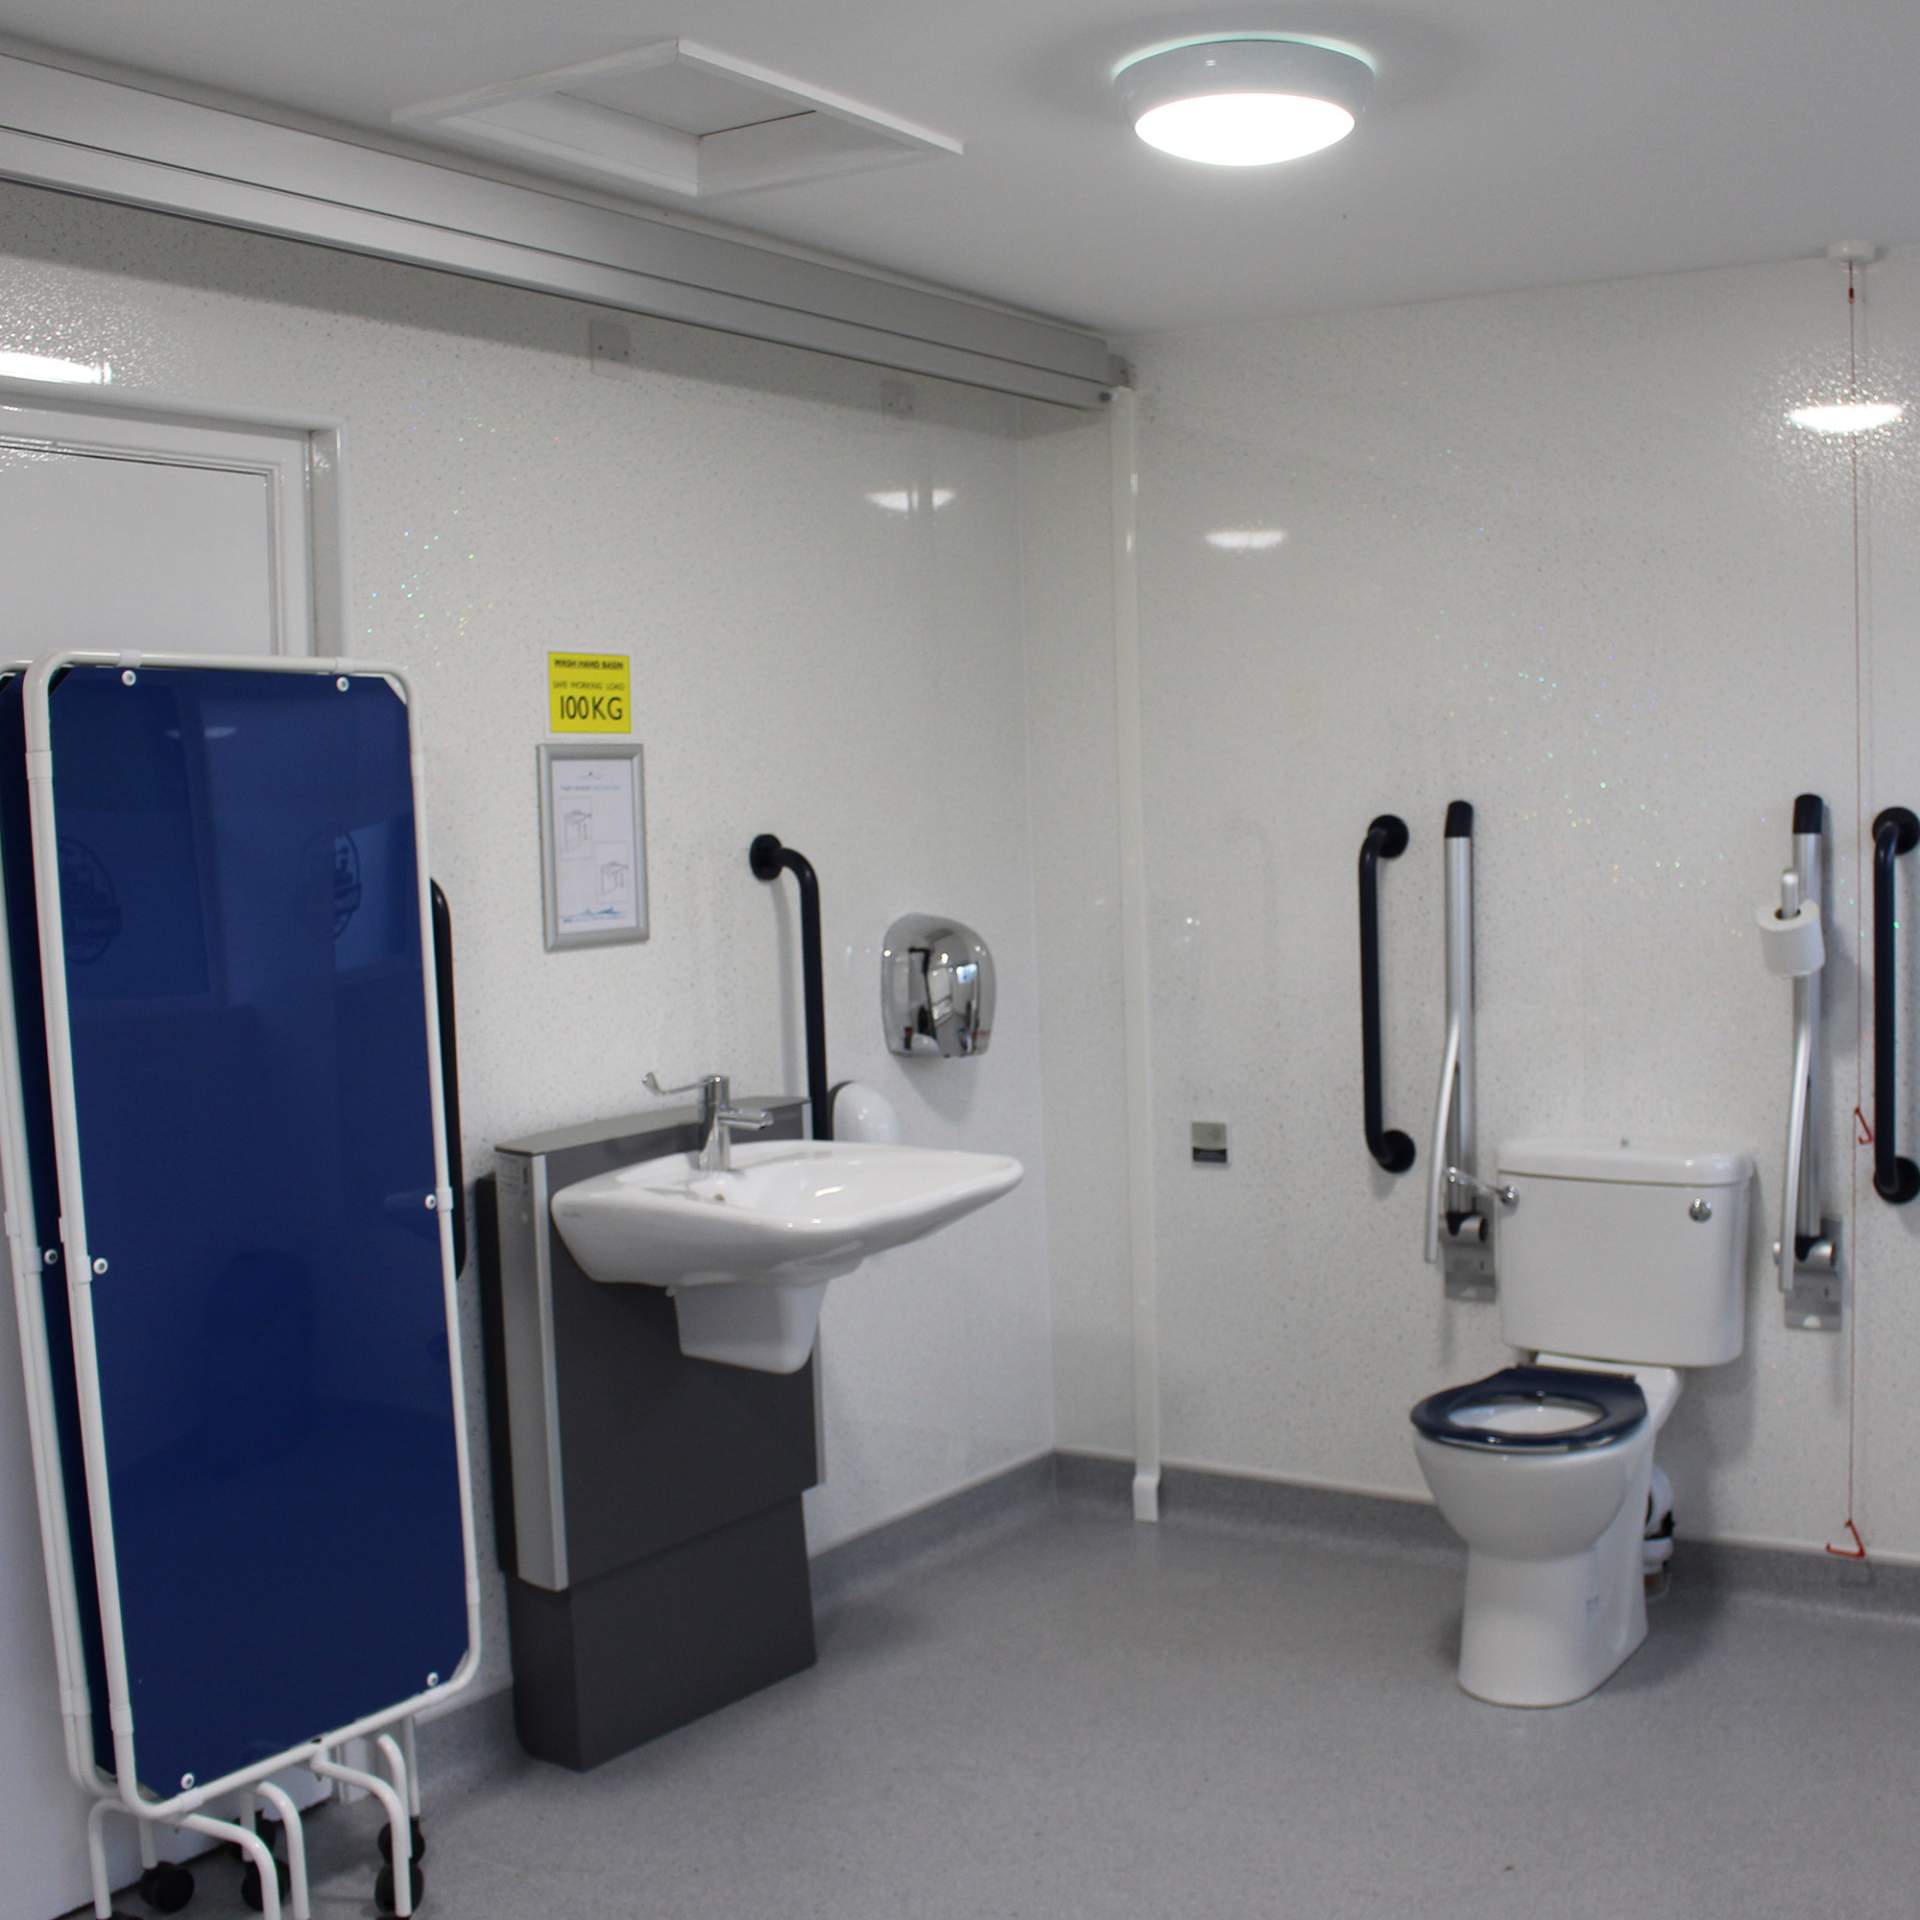 Alton Towers Resort Accessible Toilet